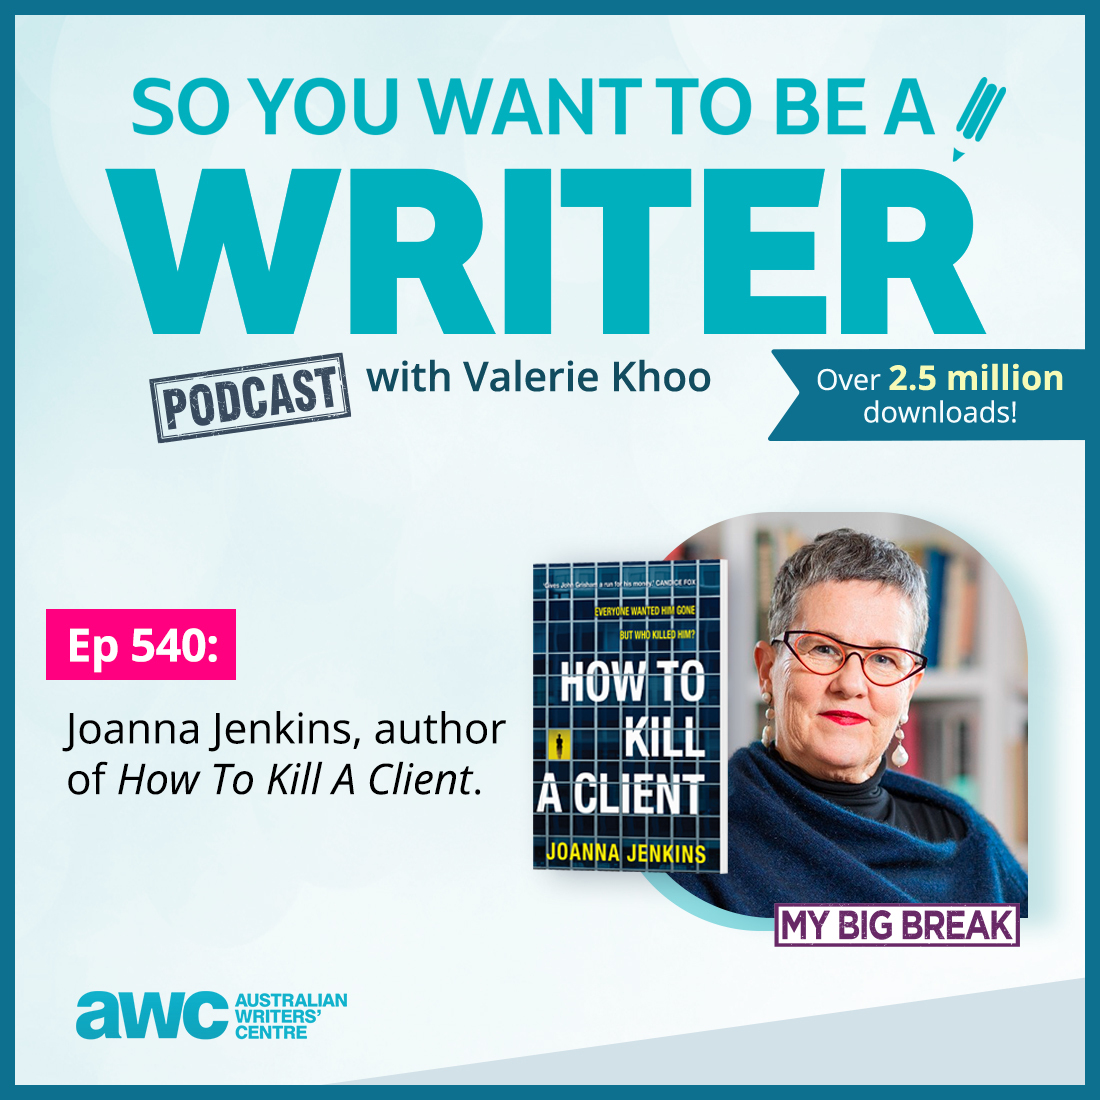 WRITER 540: Joanna Jenkins, author of ’How To Kill A Client’